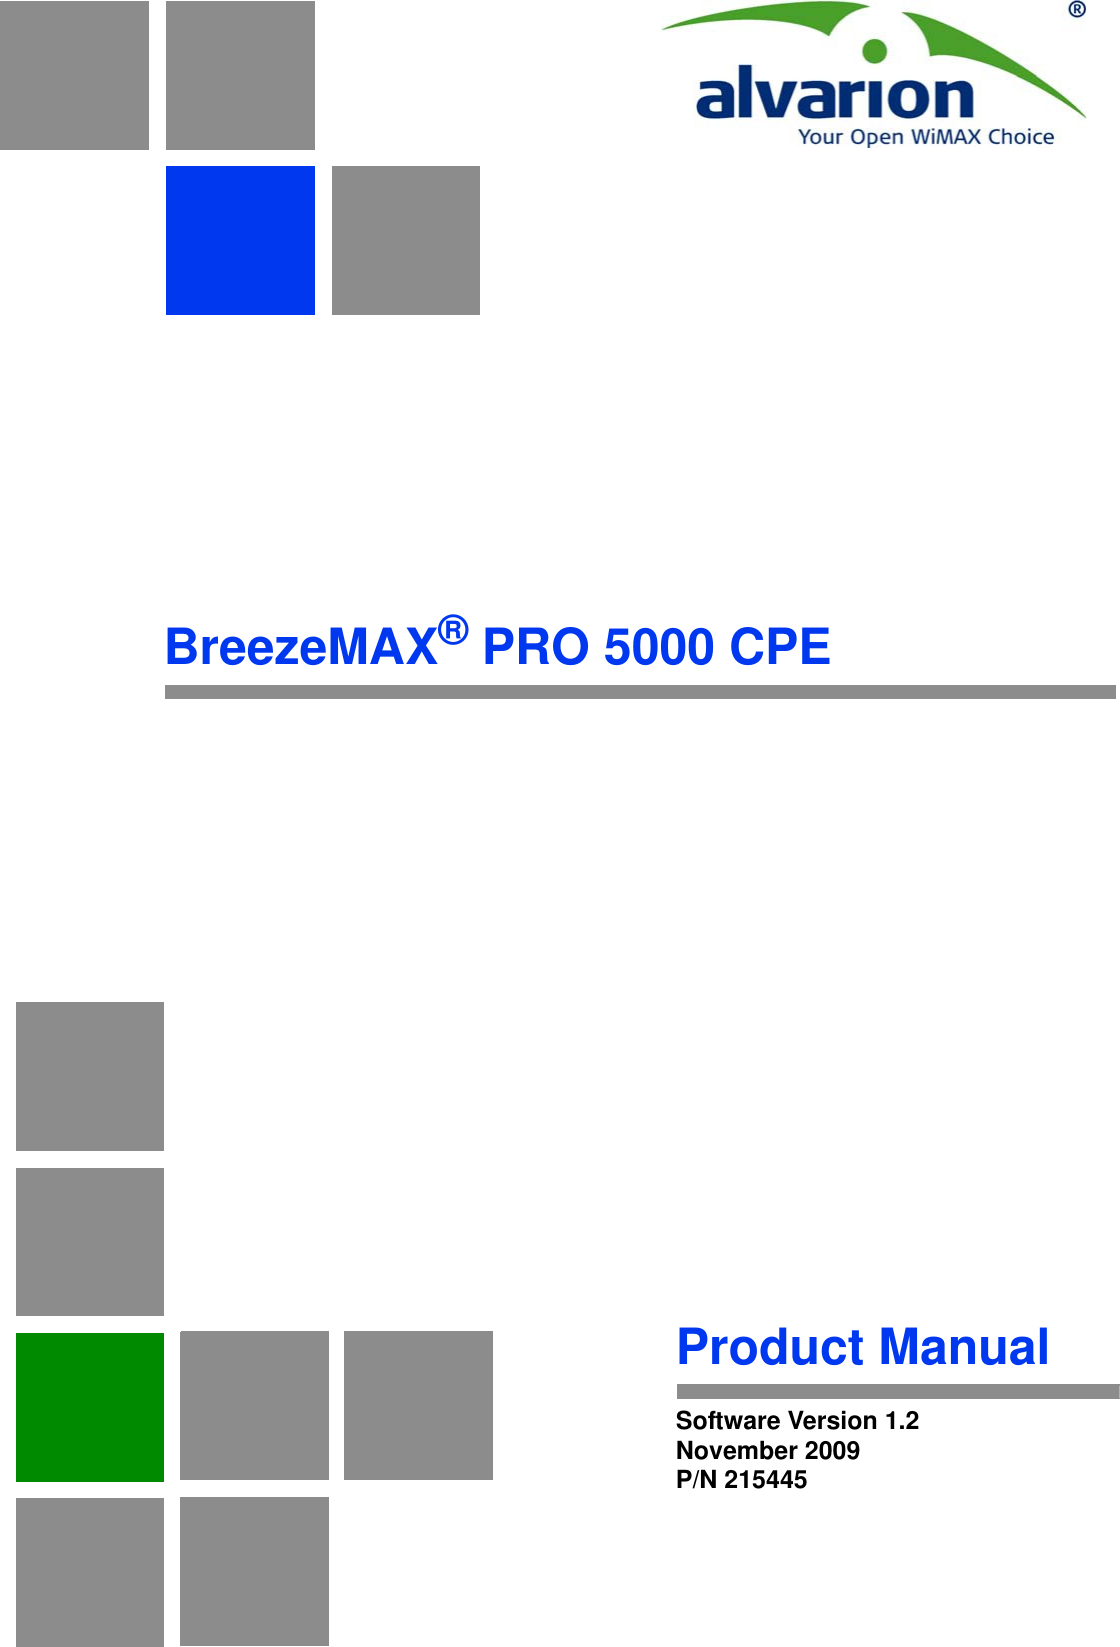 BreezeMAX® PRO 5000 CPEProduct ManualSoftware Version 1.2November 2009P/N 215445